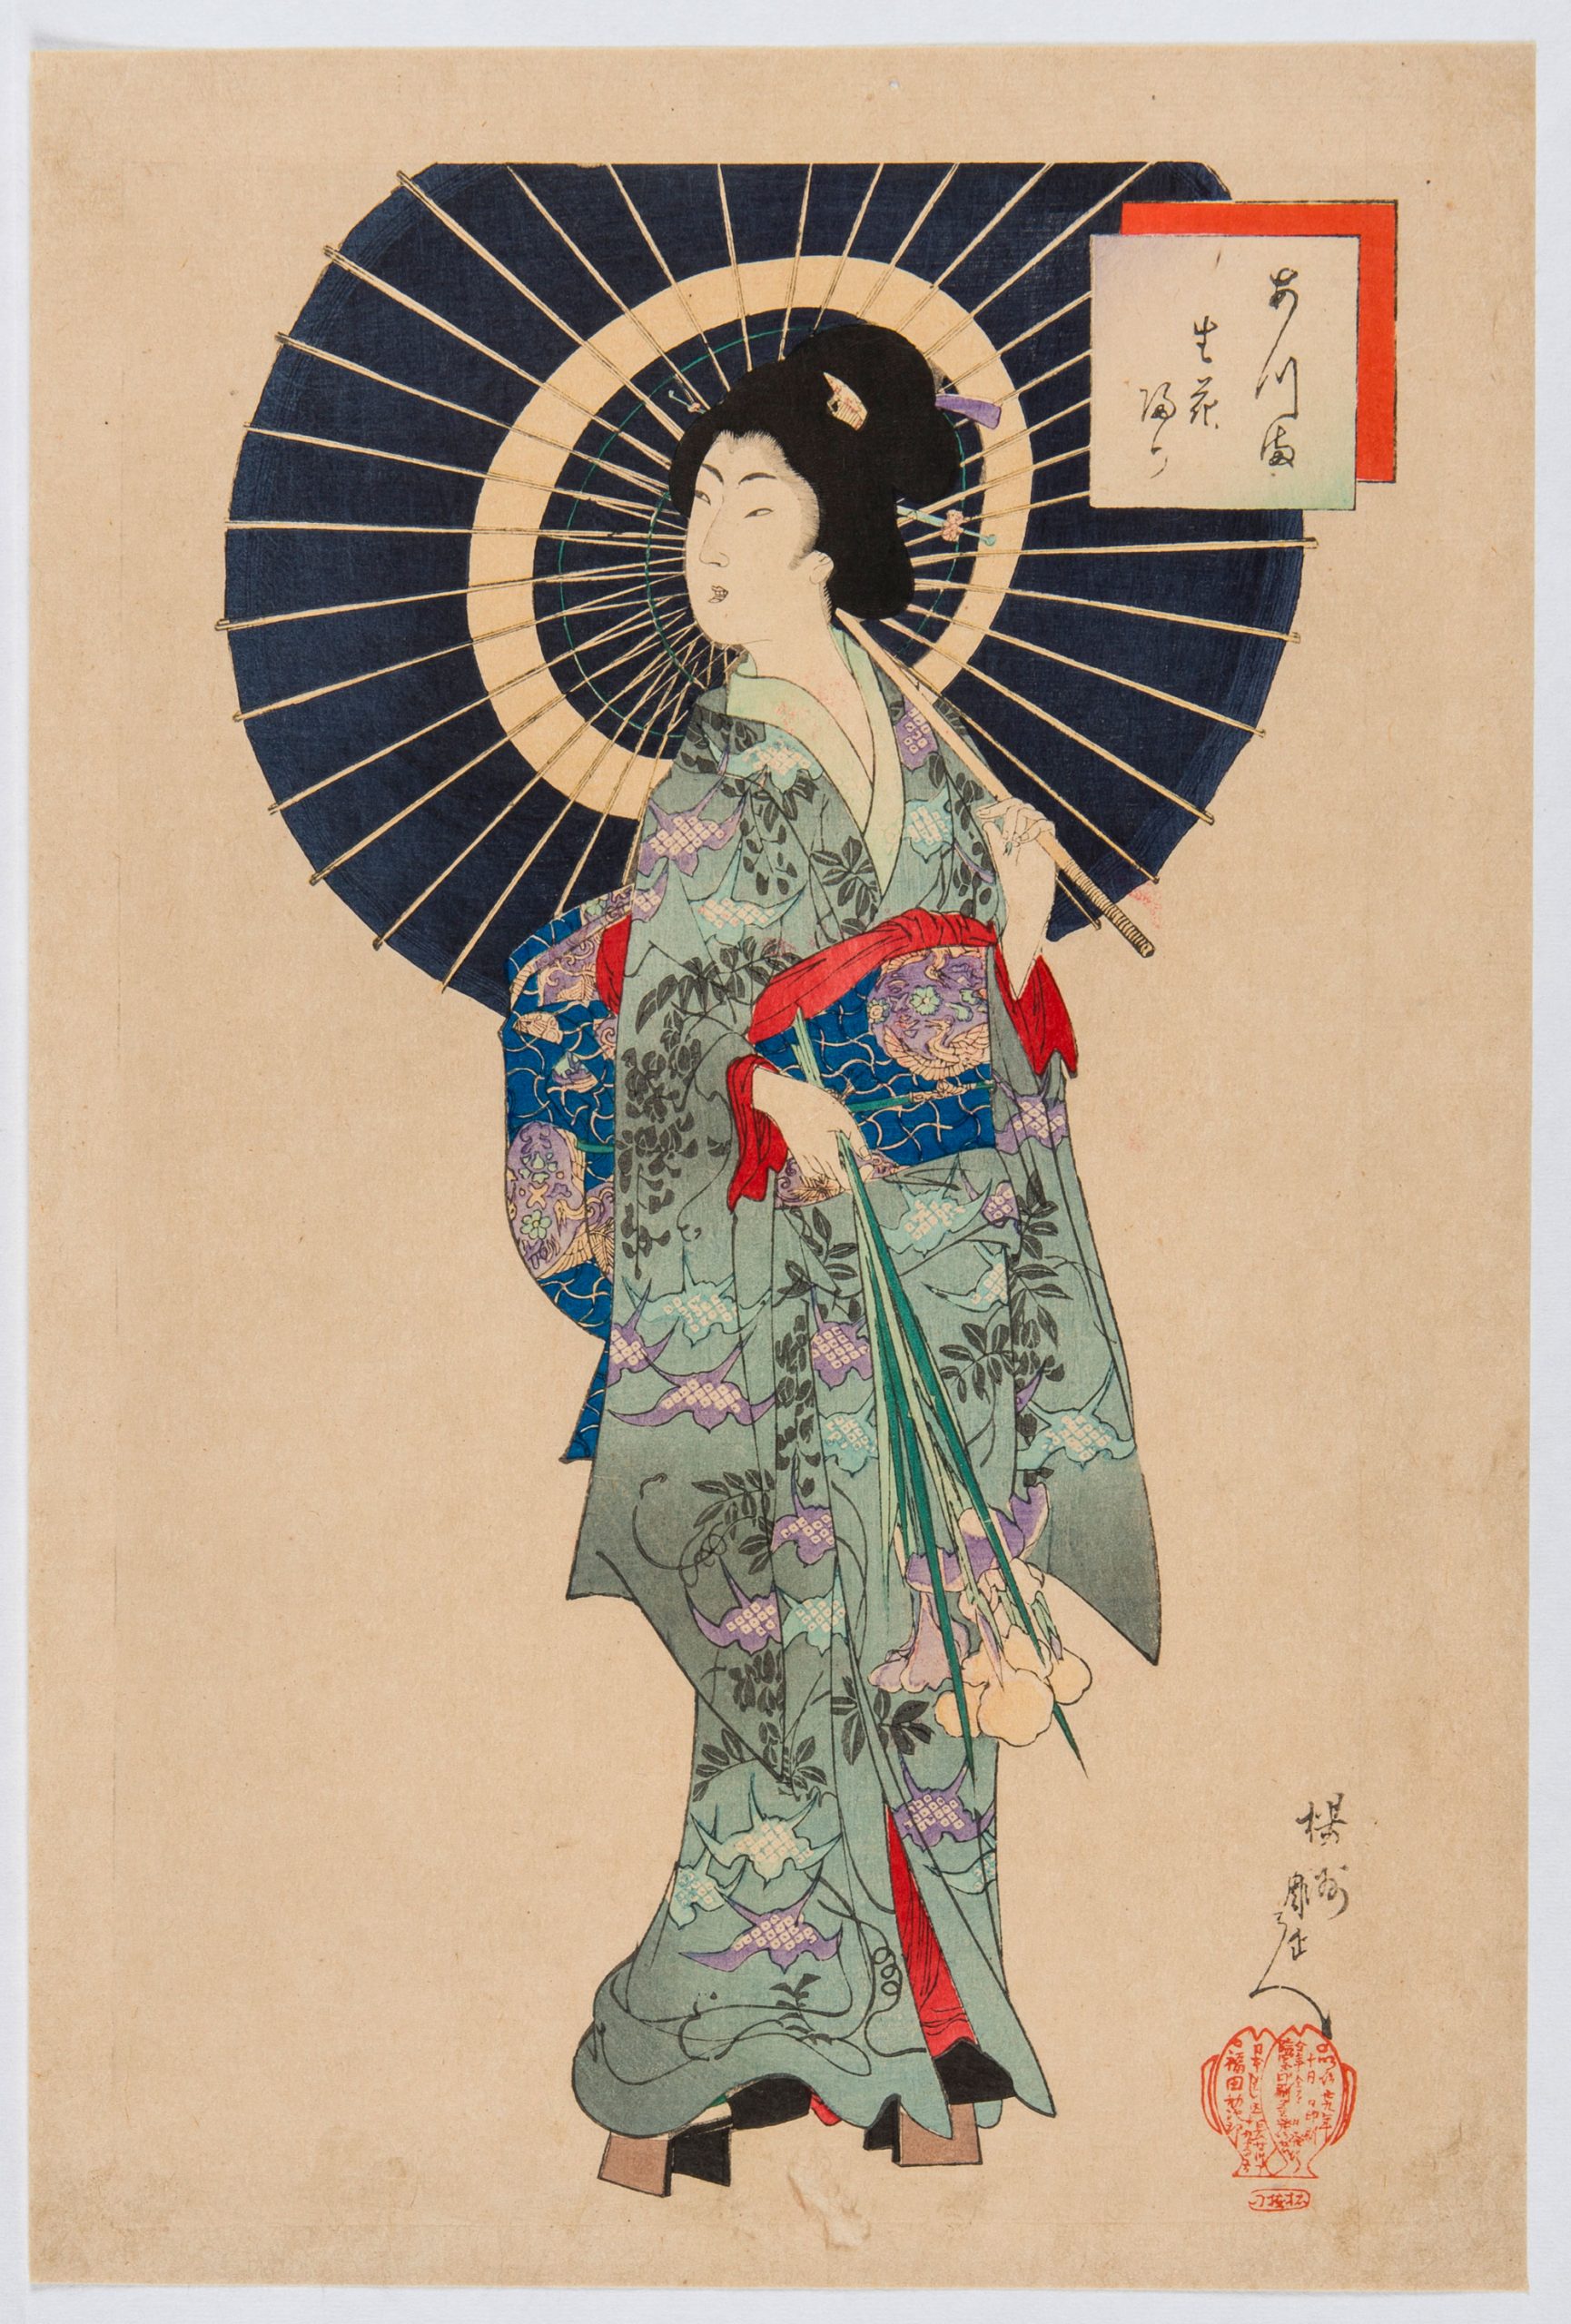 A Japanese woman with an umbrella